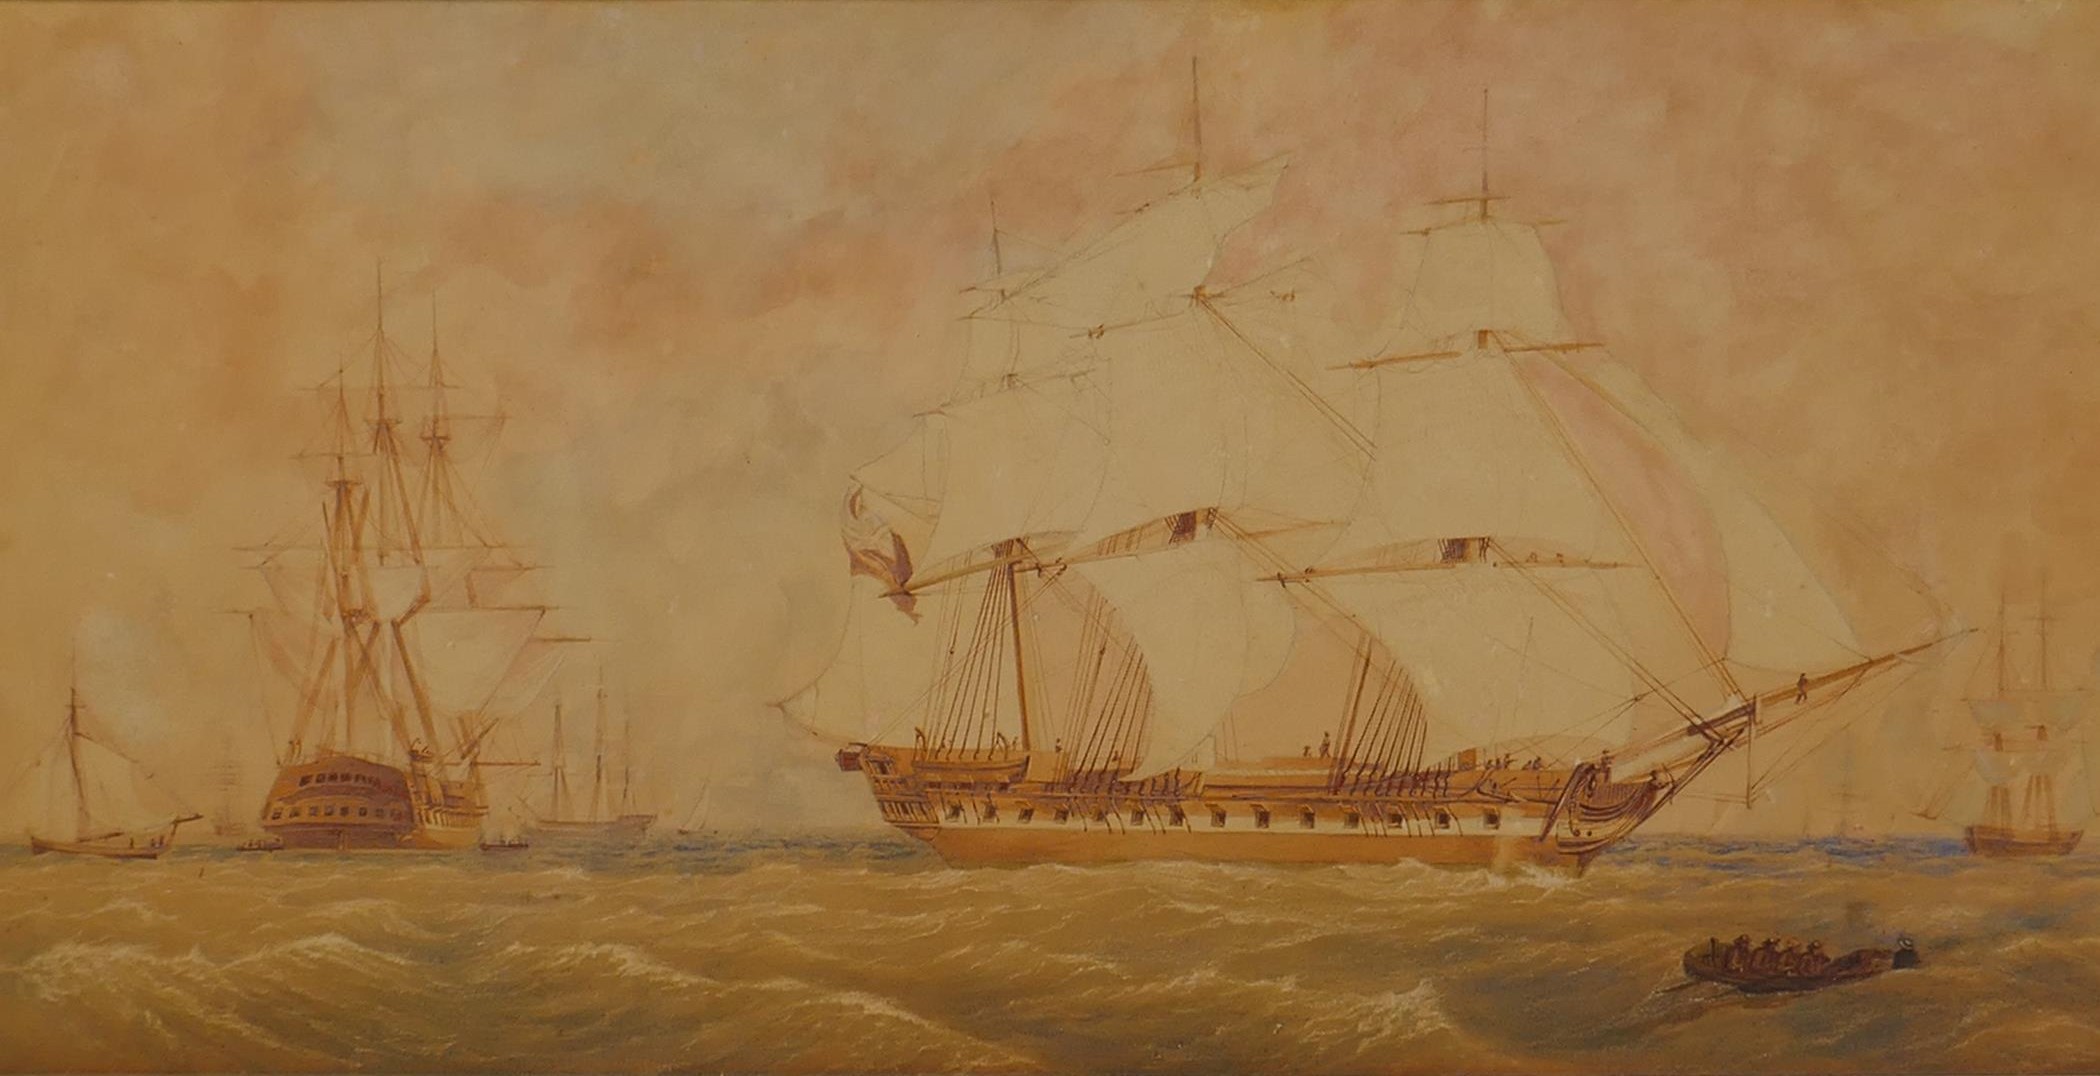 English Man-O-War and other ships on the open sea, early C19th, watercolour, 23 x 47cm - Image 2 of 2